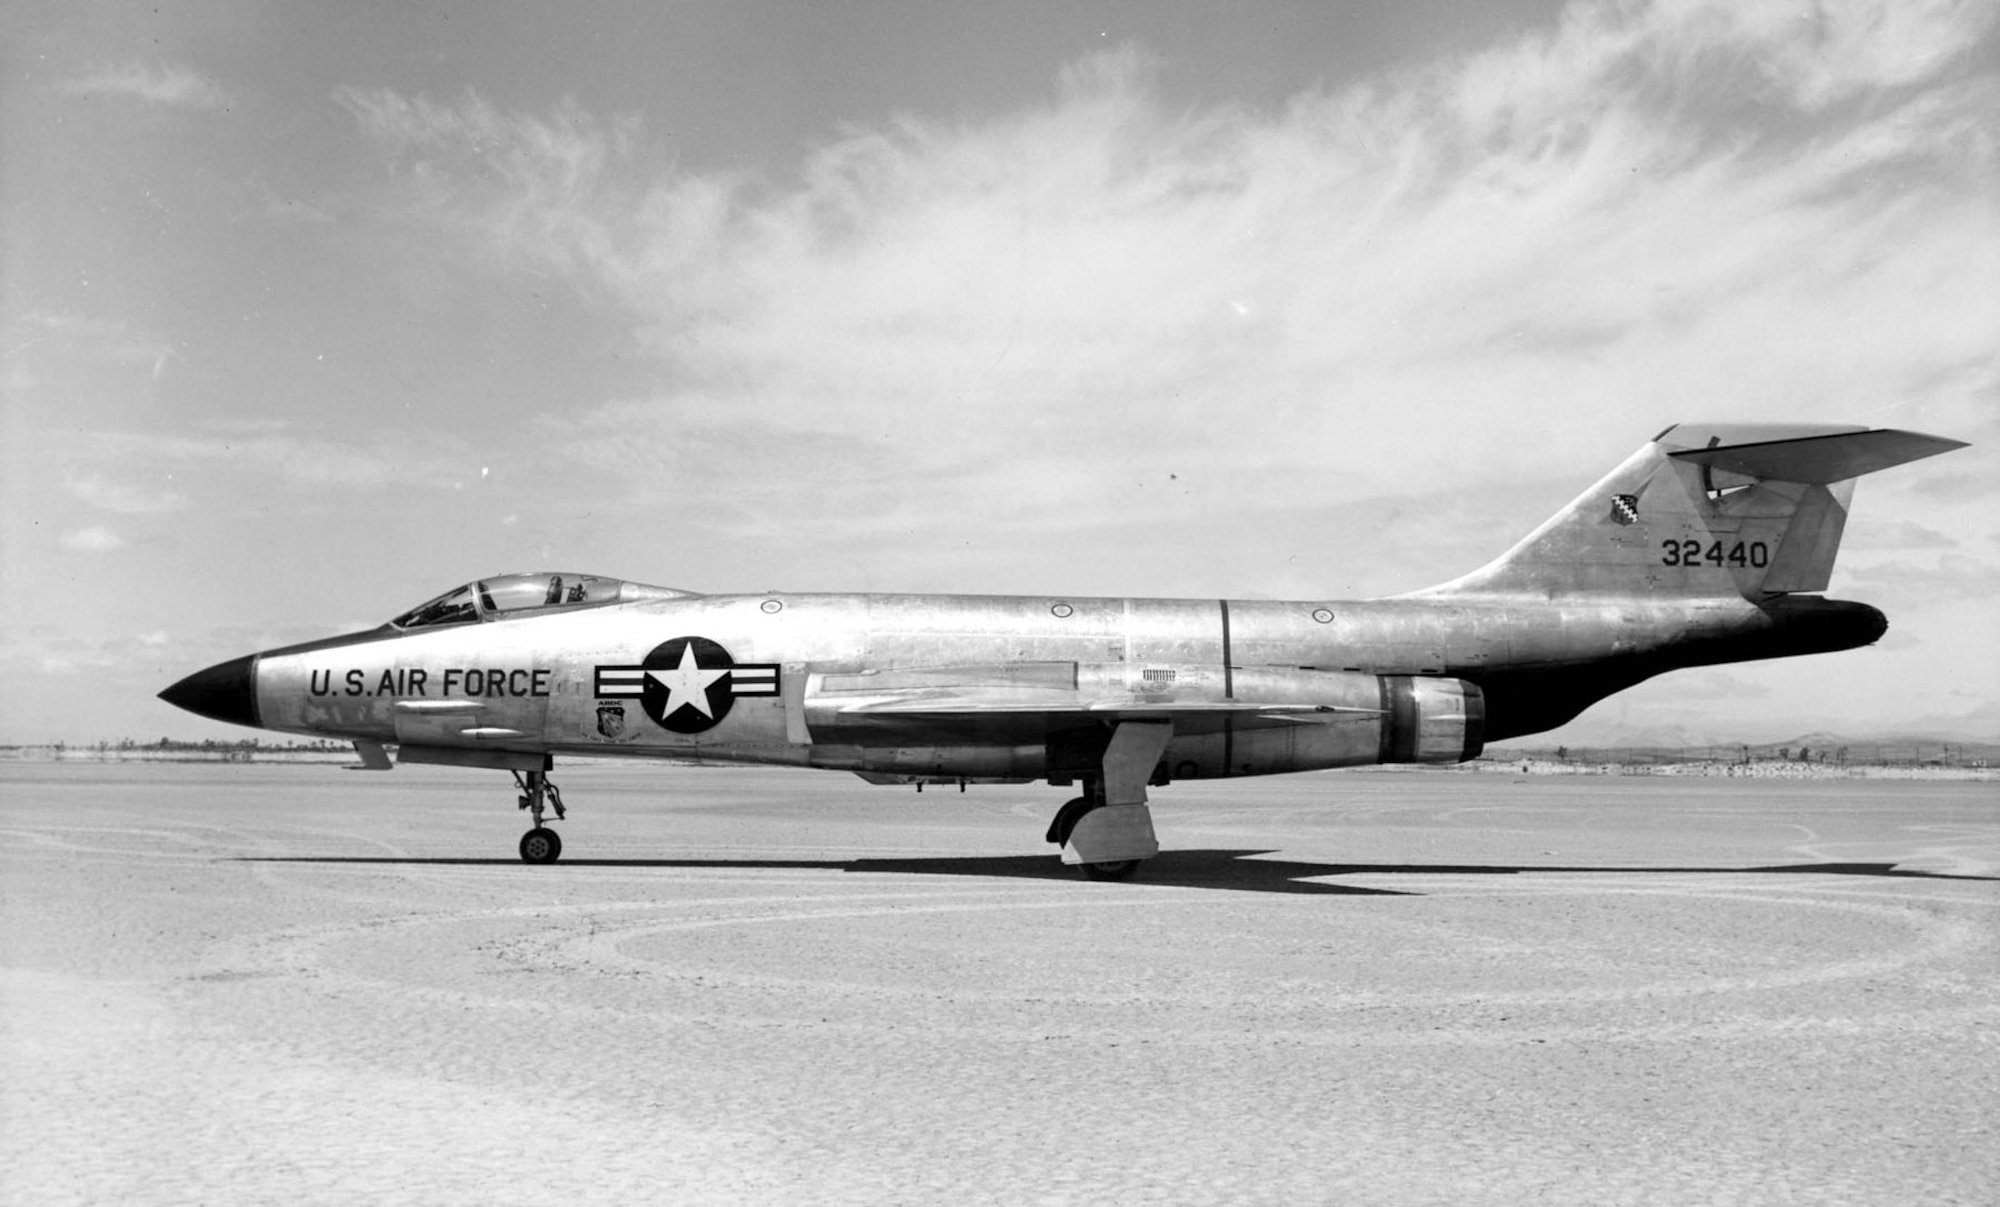 McDonnell F-101A (S/N 53-2440) at Edwards Air Force Base, Calif. (U.S. Air Force photo)